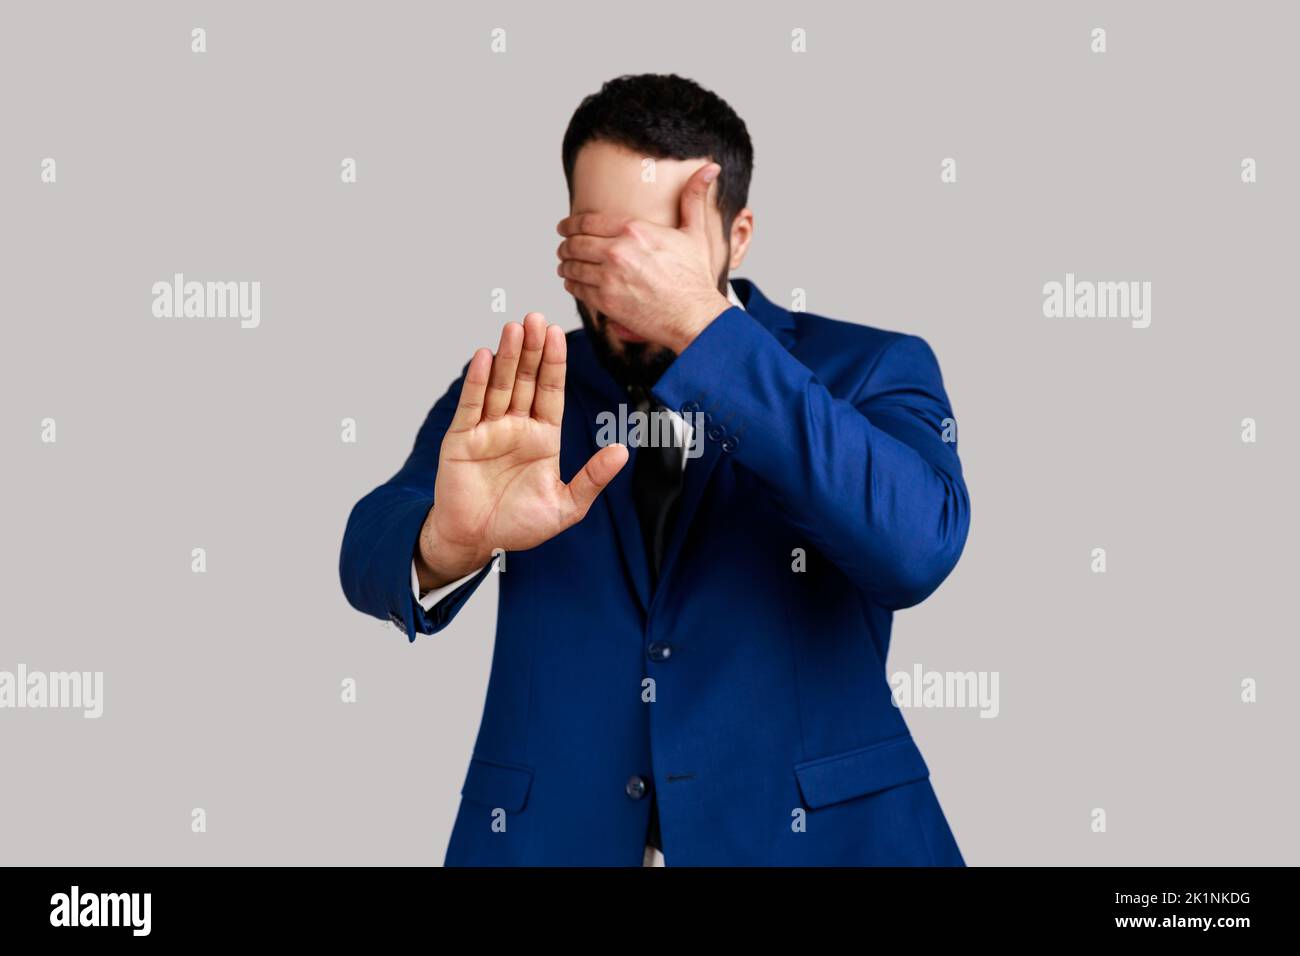 Man closing eyes with hand, outstretching palm, dont want to see that, ignoring problems, hiding from stressful situations, wearing official style suit. Indoor studio shot isolated on gray background. Stock Photo